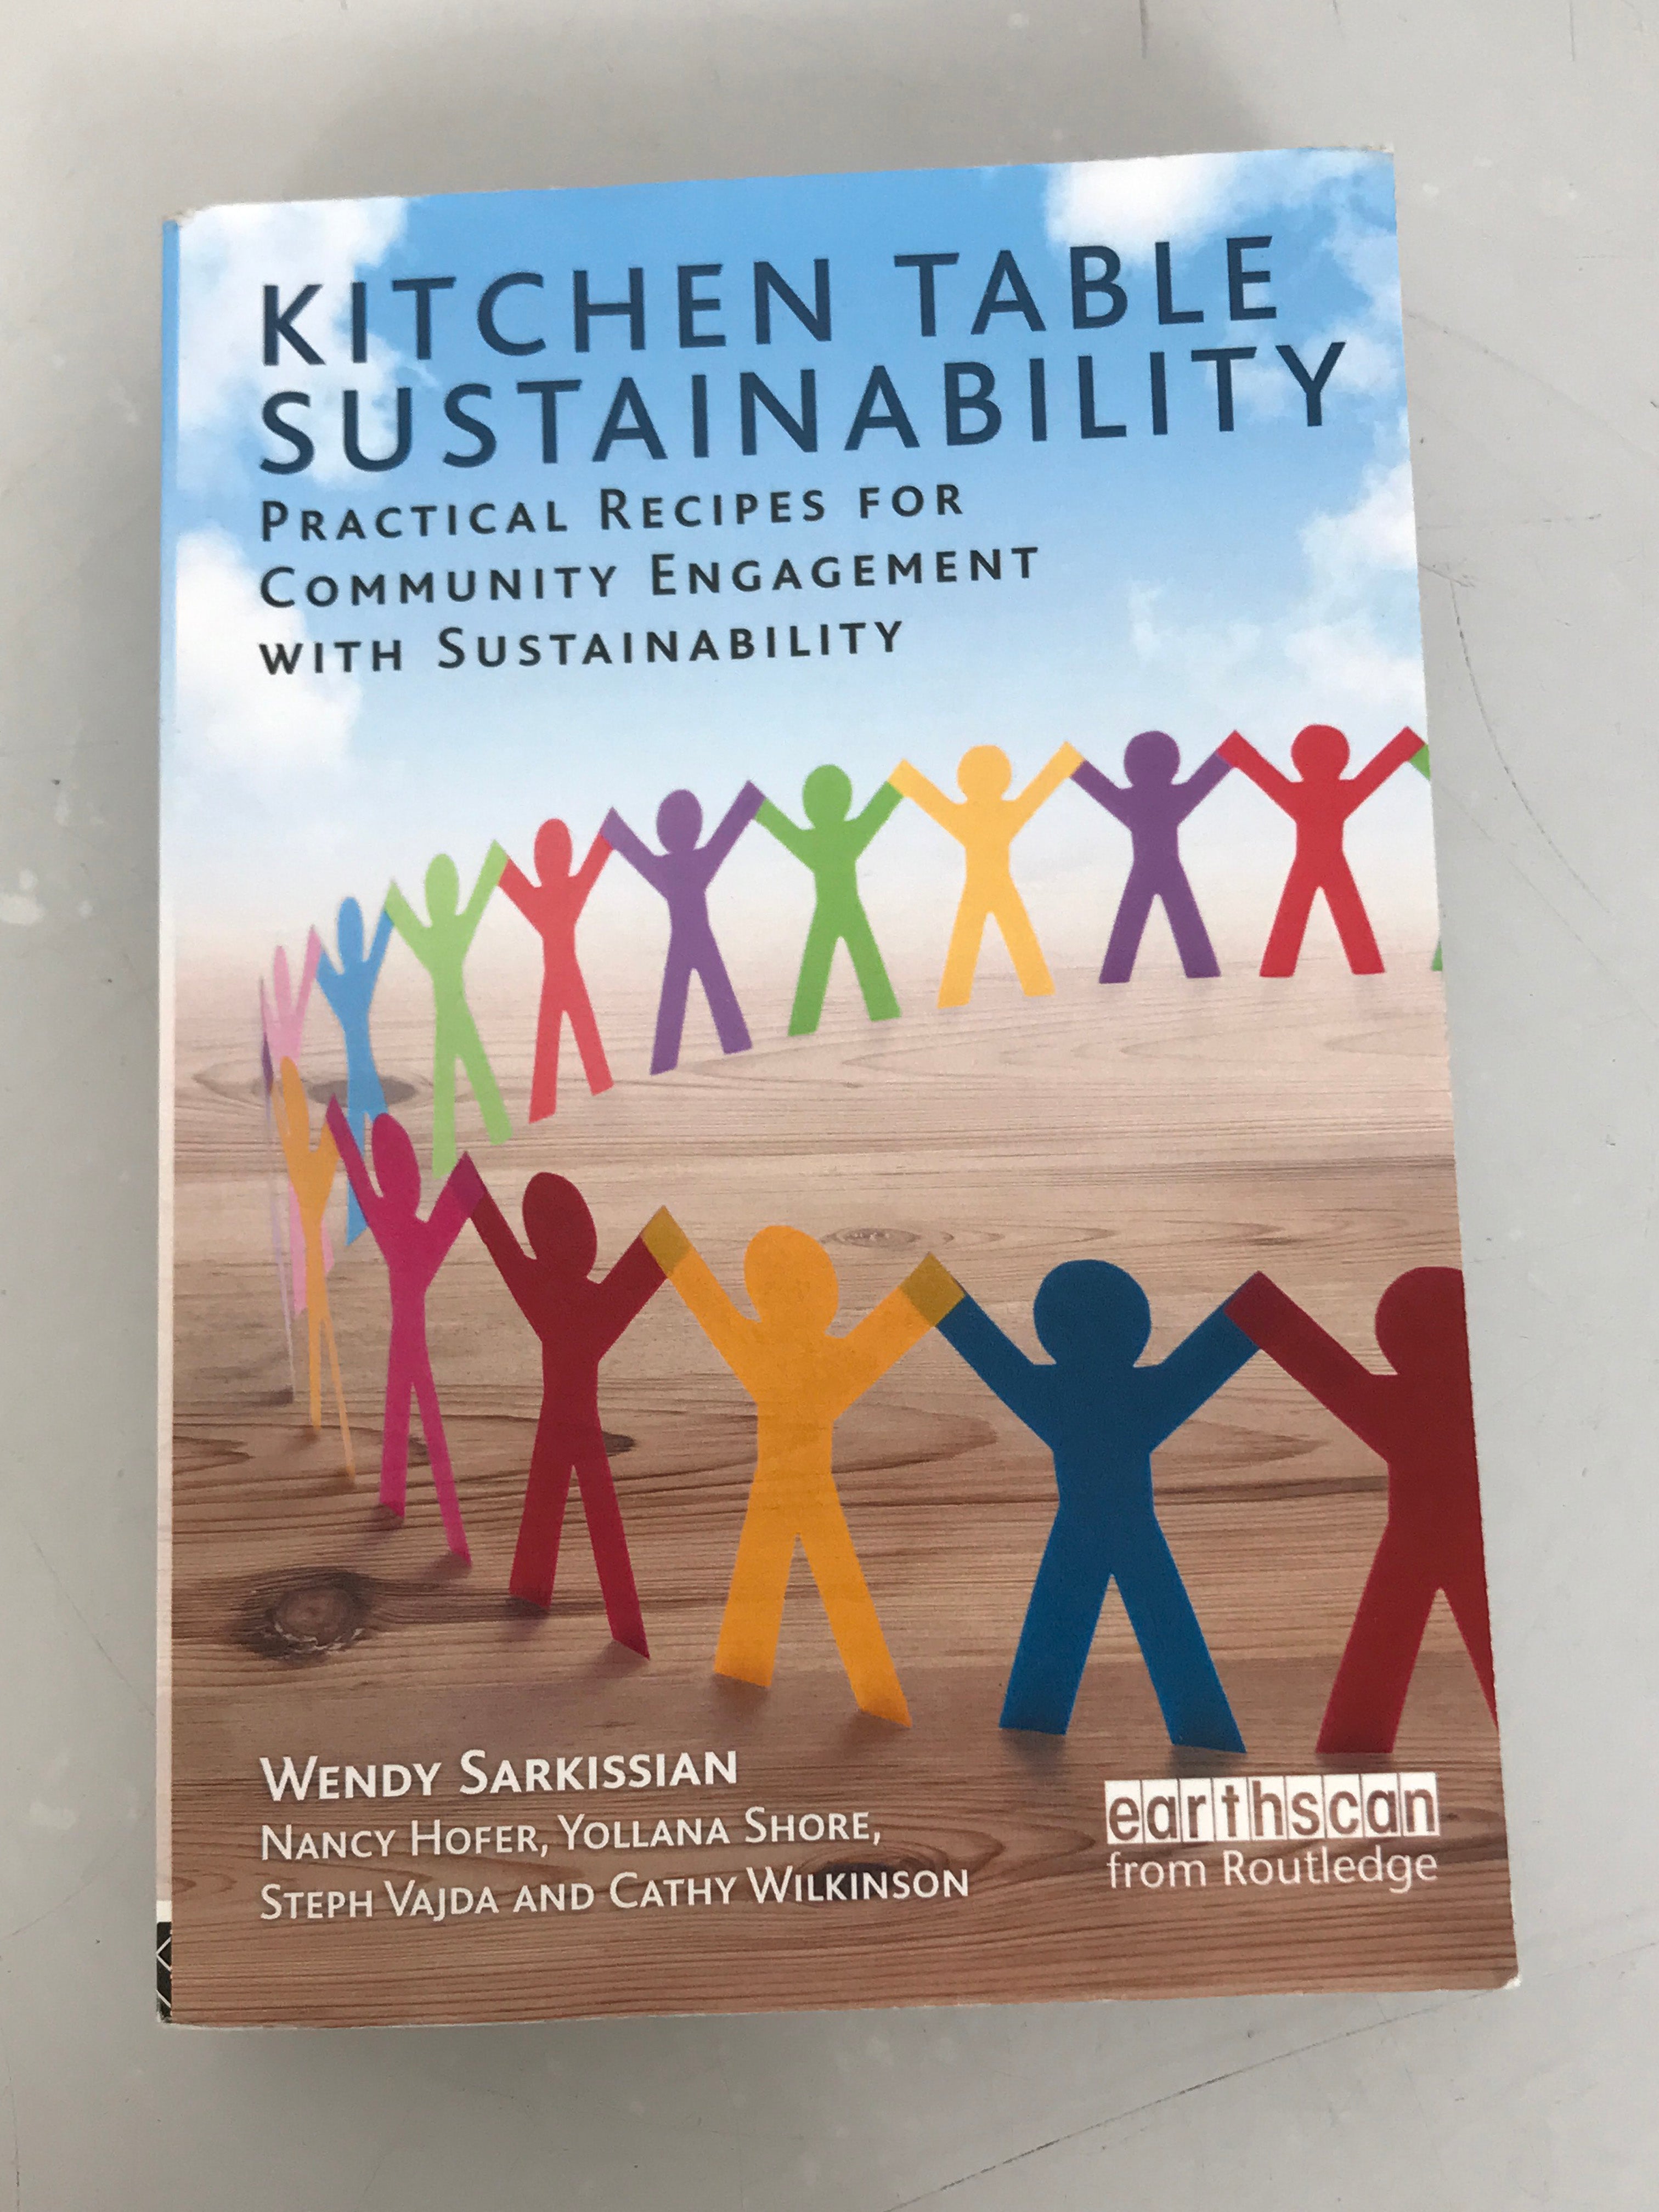 Kitchen Table Sustainability Practical Recipes for Community Engagement with Sustainability by Wendy Sarkissian 2009 SC